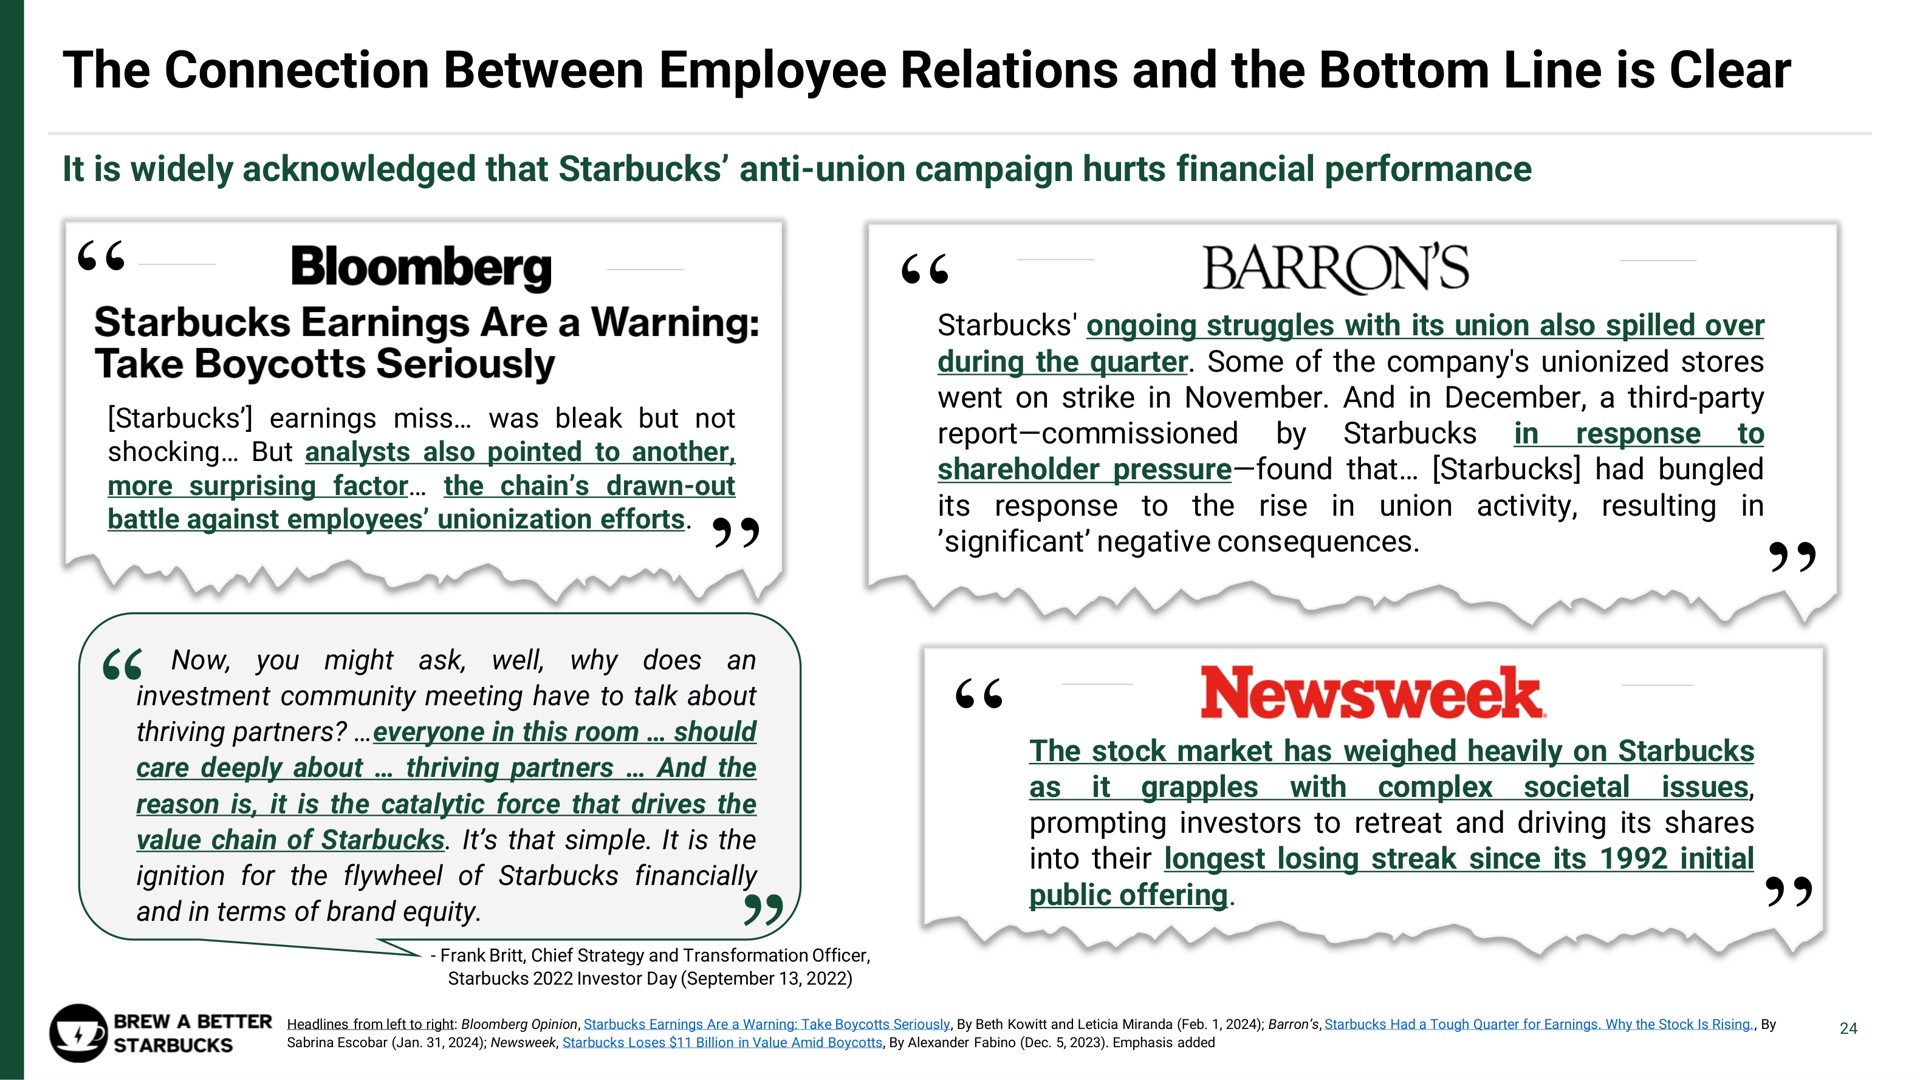 the connection between employee relations and the bottom line is clear | Strategic Organizing Center